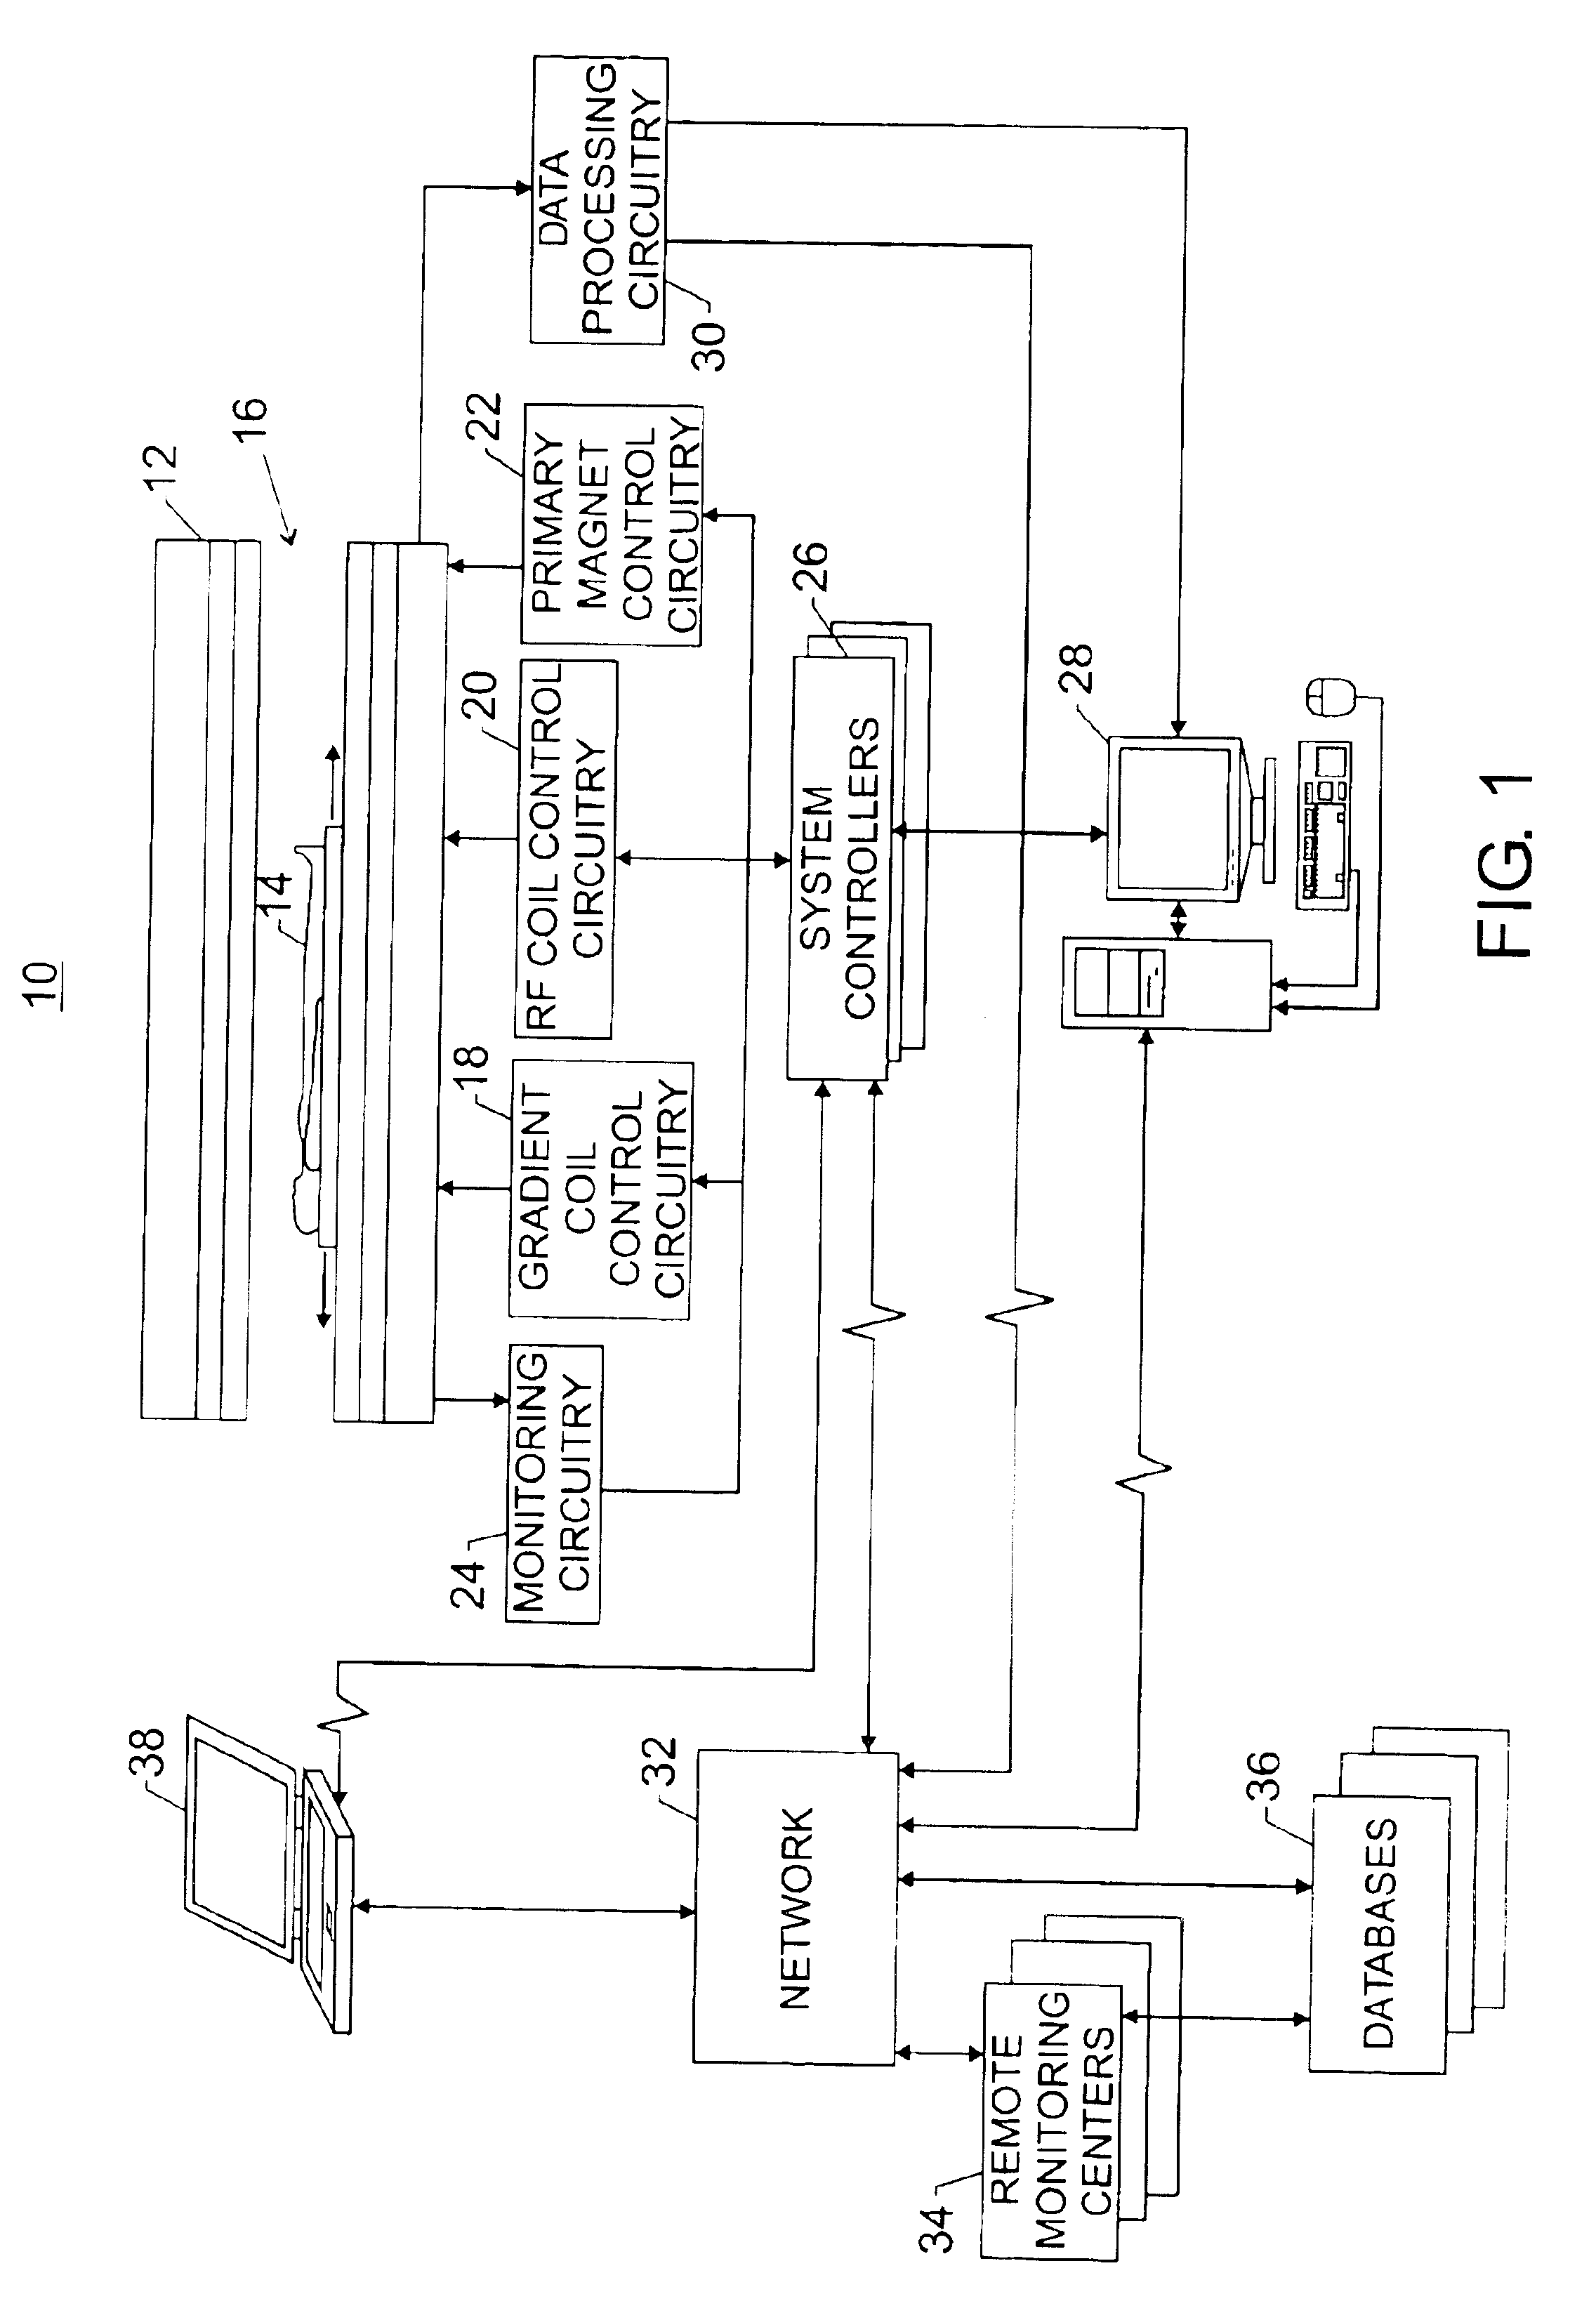 Method and apparatus for monitoring superconducting magnet data